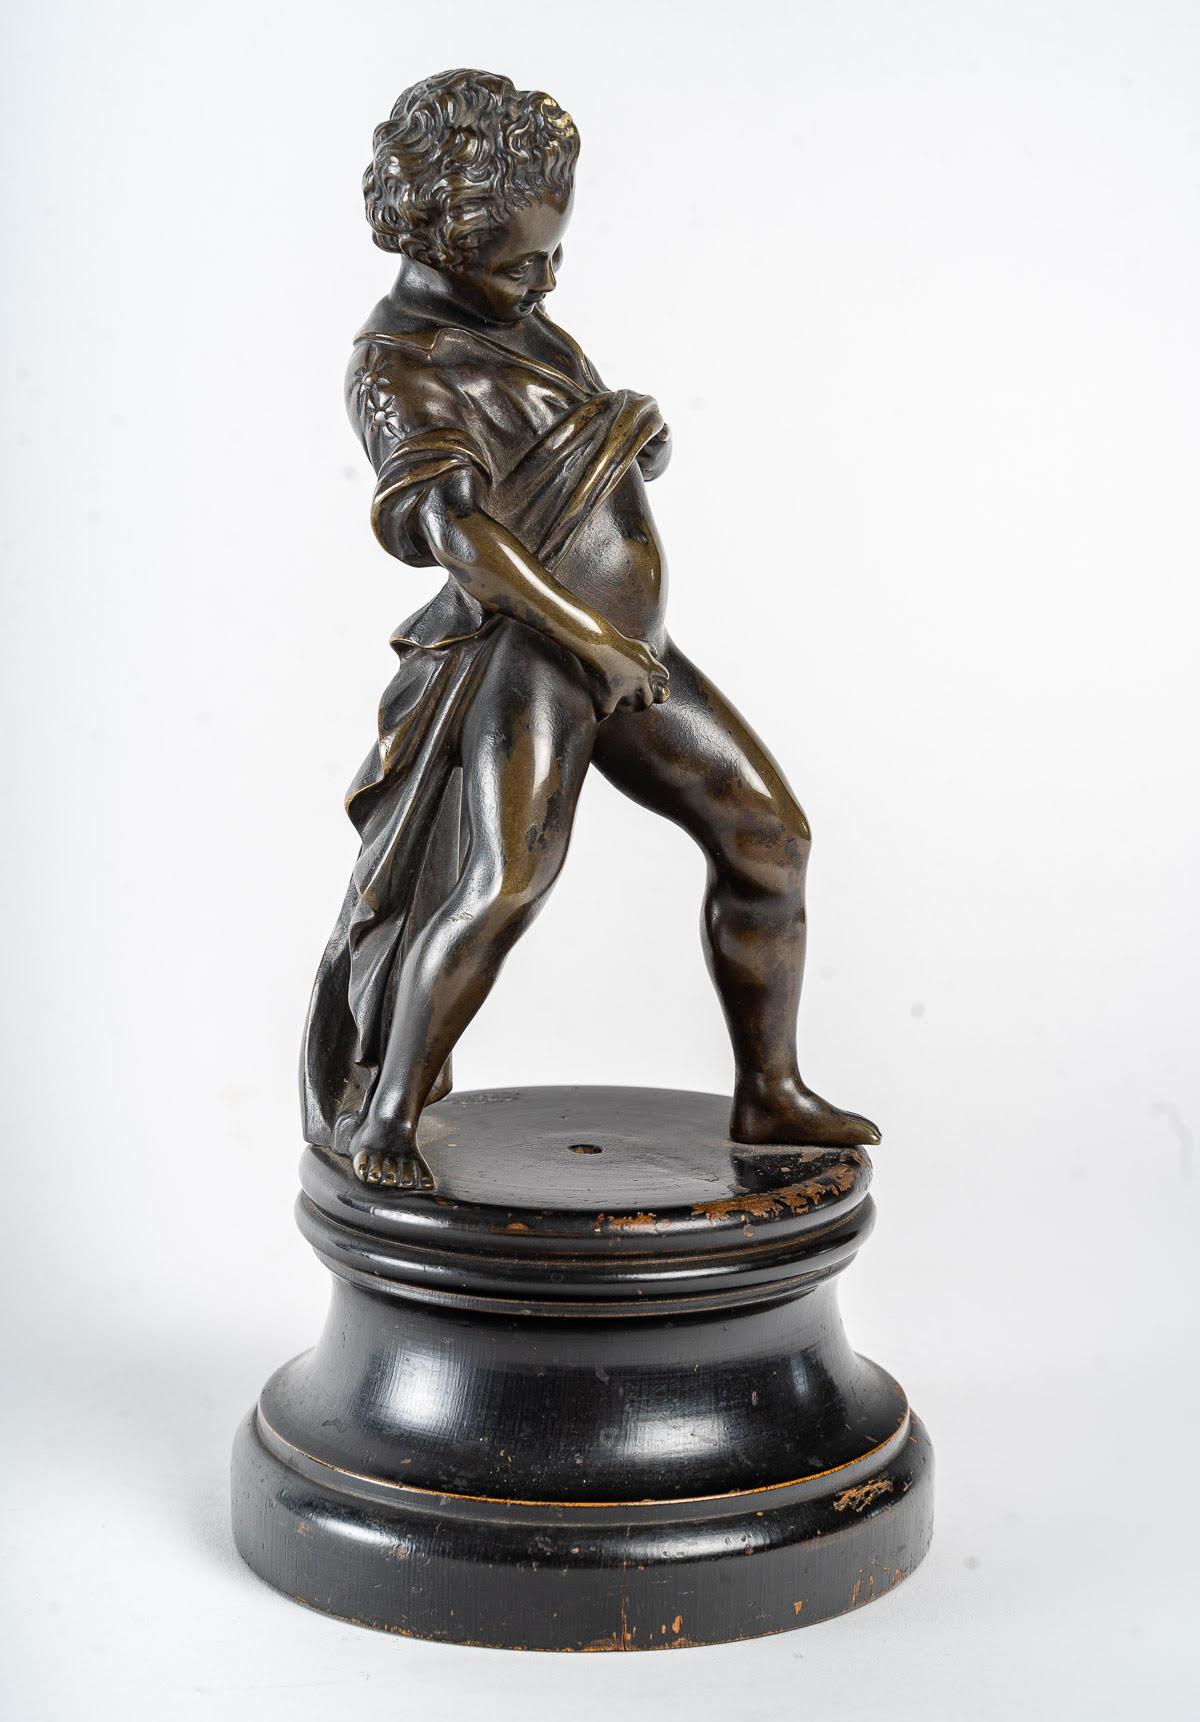 Bronze Sculpture of the XIXth Century of Louis XV Style

Beautiful bronze sculpture of the XIXth century on its base in blackened wood of Louis XV style, representing a child who is peeing, very beautiful patina and great quality of